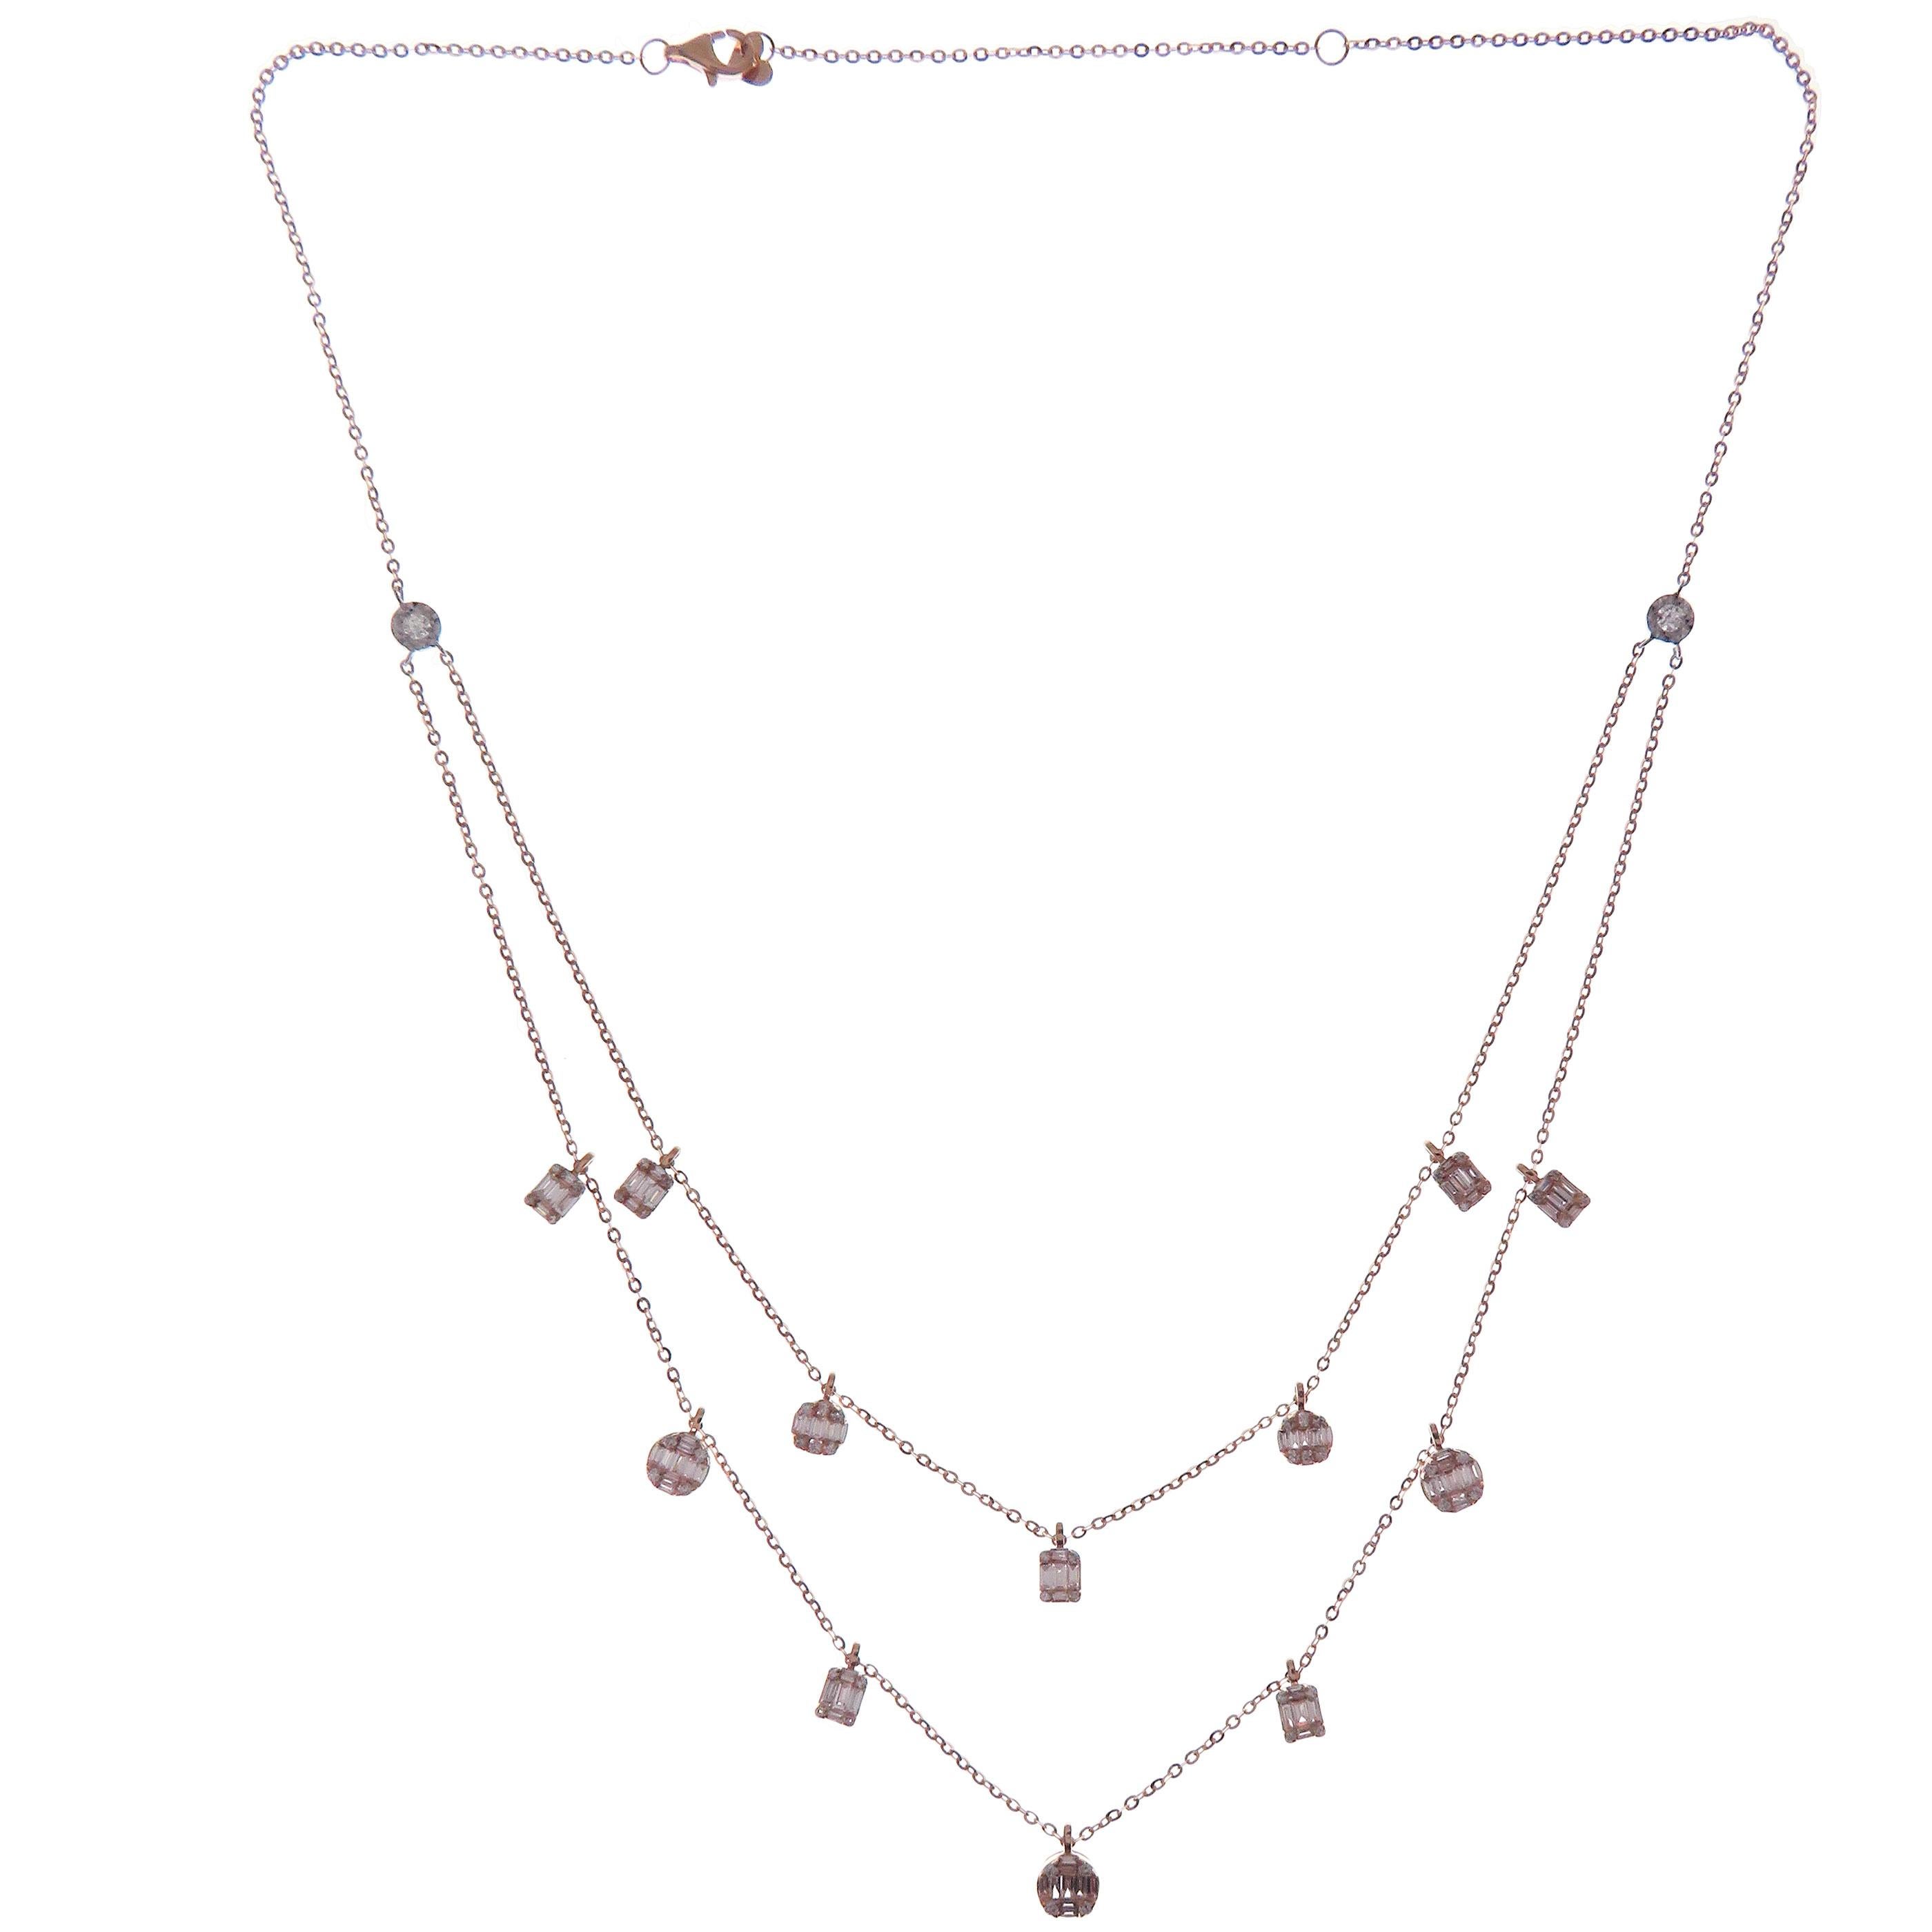 This delicate double-strand necklace is crafted in 18-karat rose gold, weighing approximately 1.35 total carats of SI-H Quality white diamonds. 
18-karat white gold and yellow gold are also available upon request.

Necklace is 16